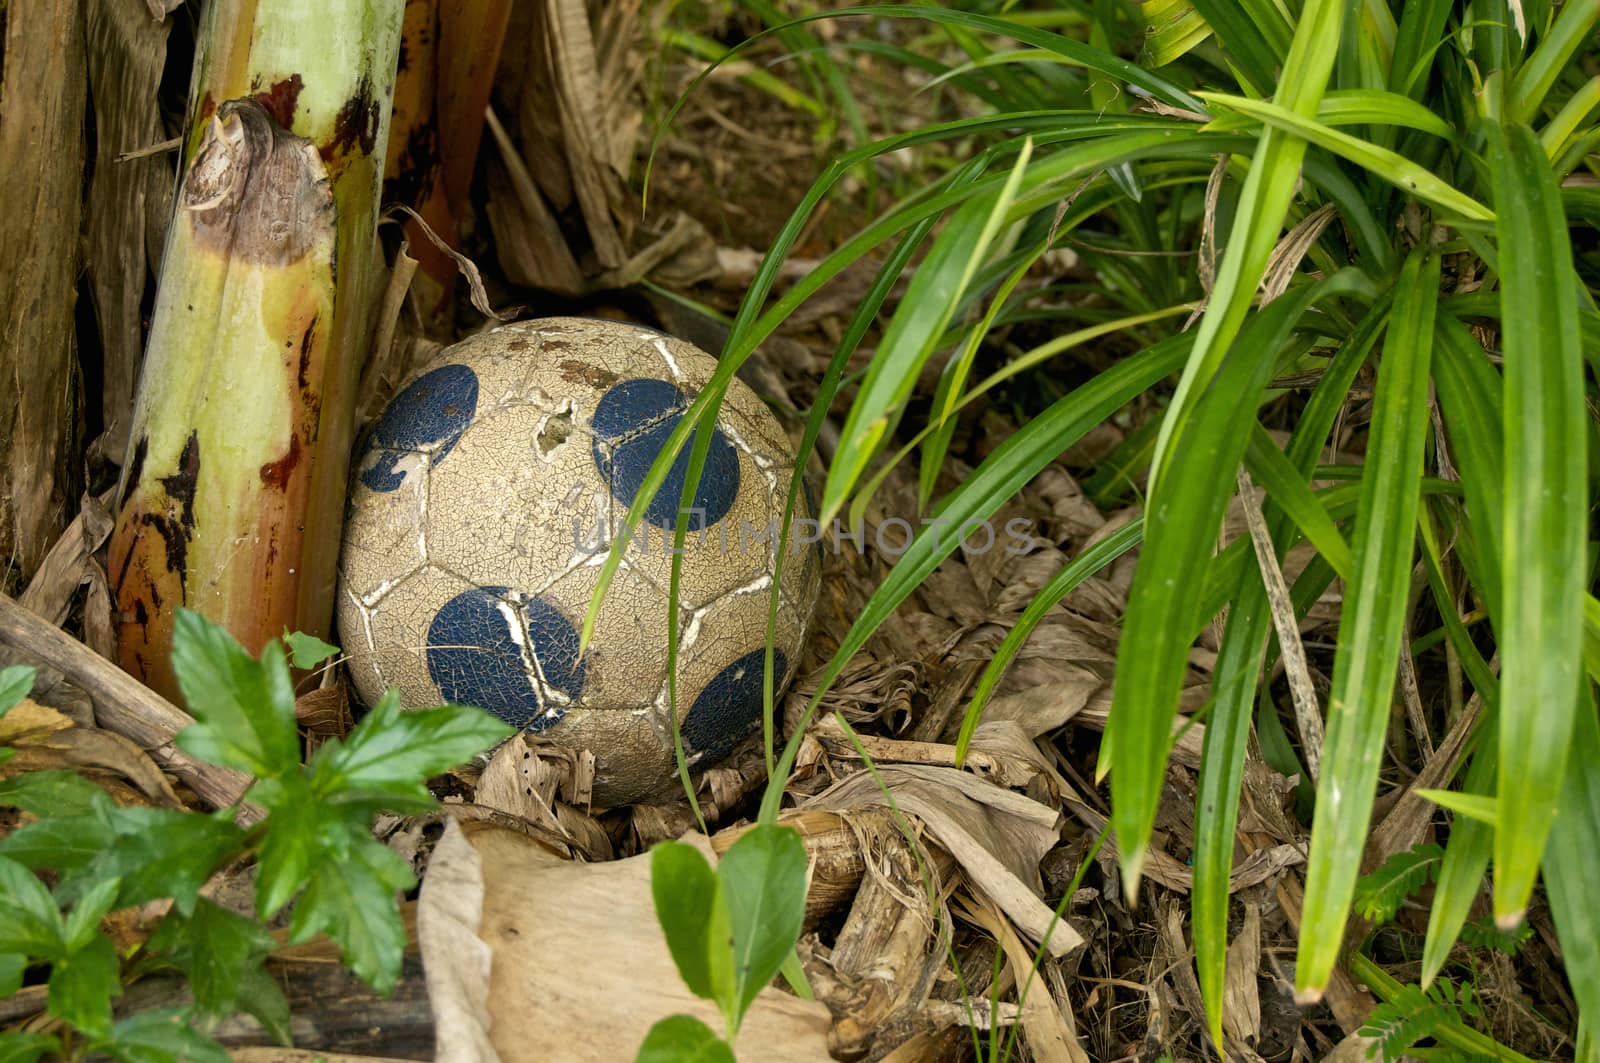 Very old leather ball is placed under a banana tree.